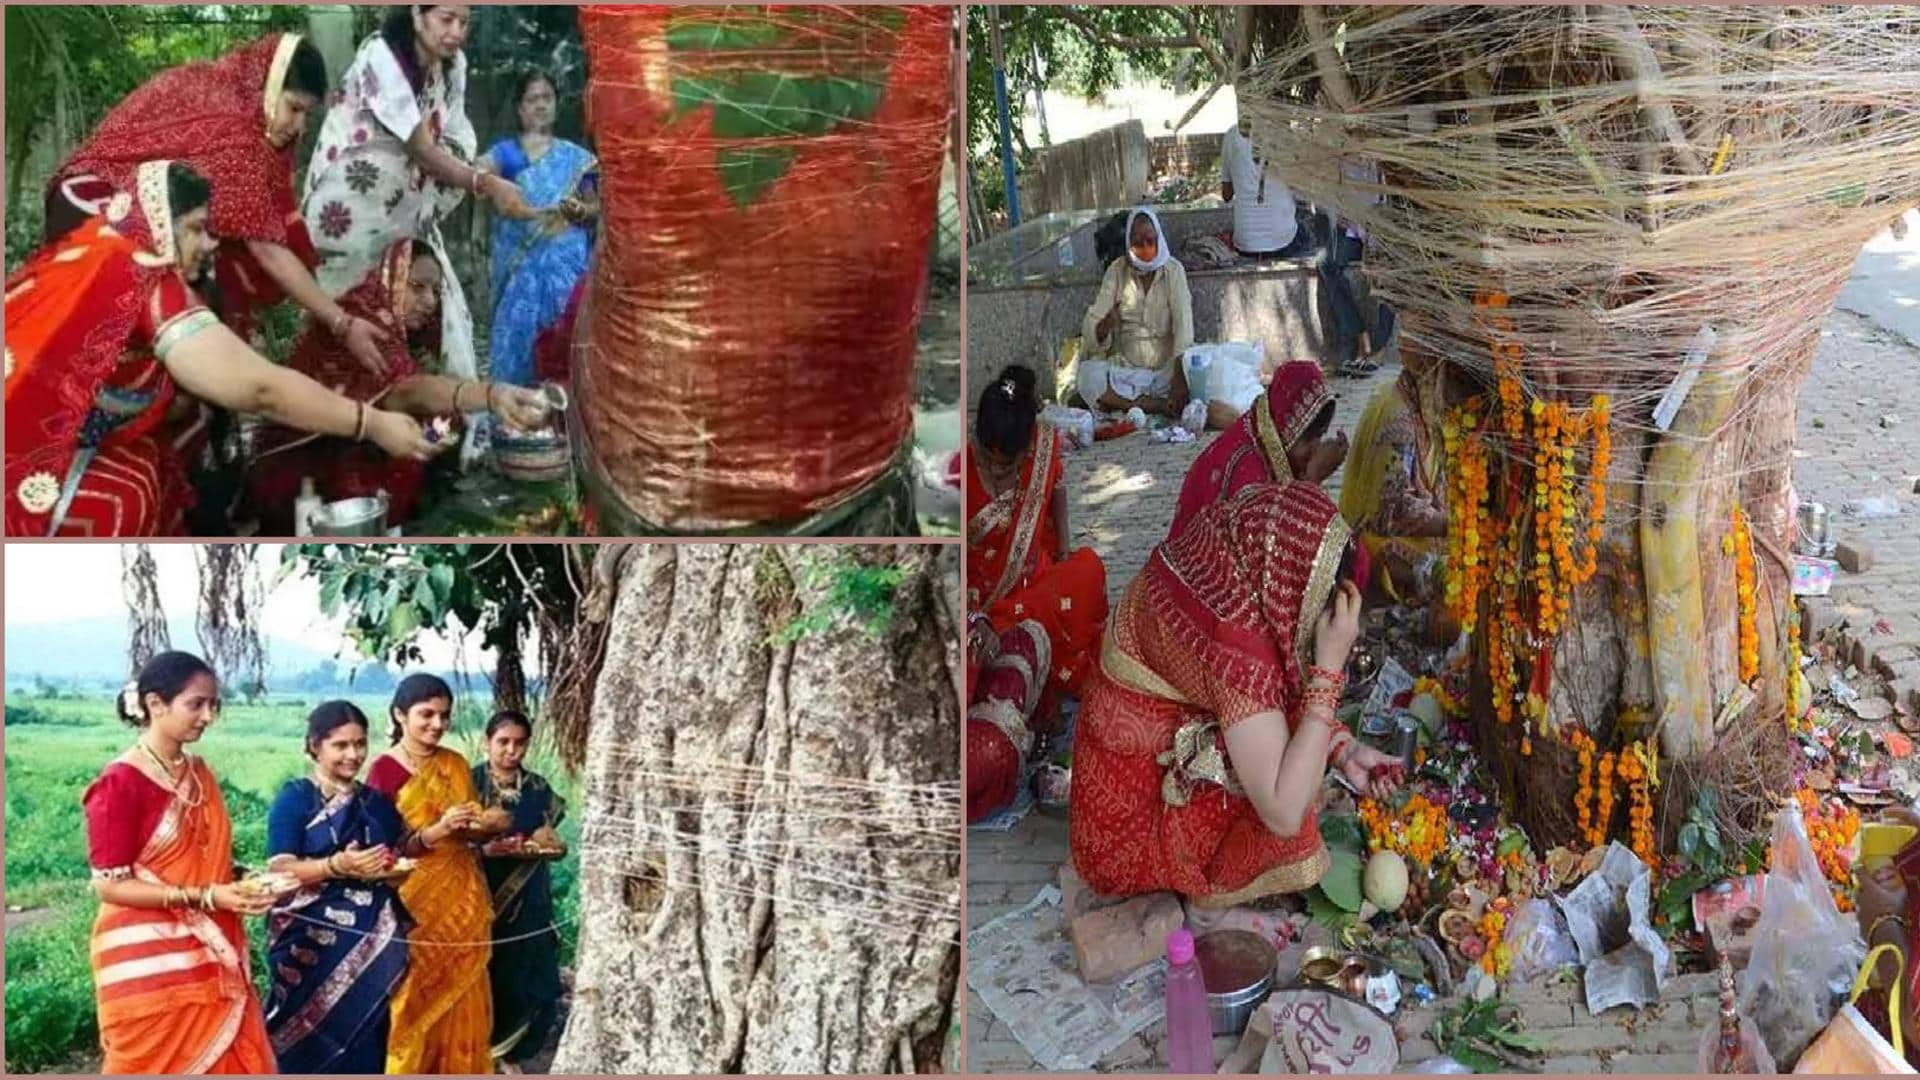 Vat Savitri Puja: Know about its rituals, significance, and history